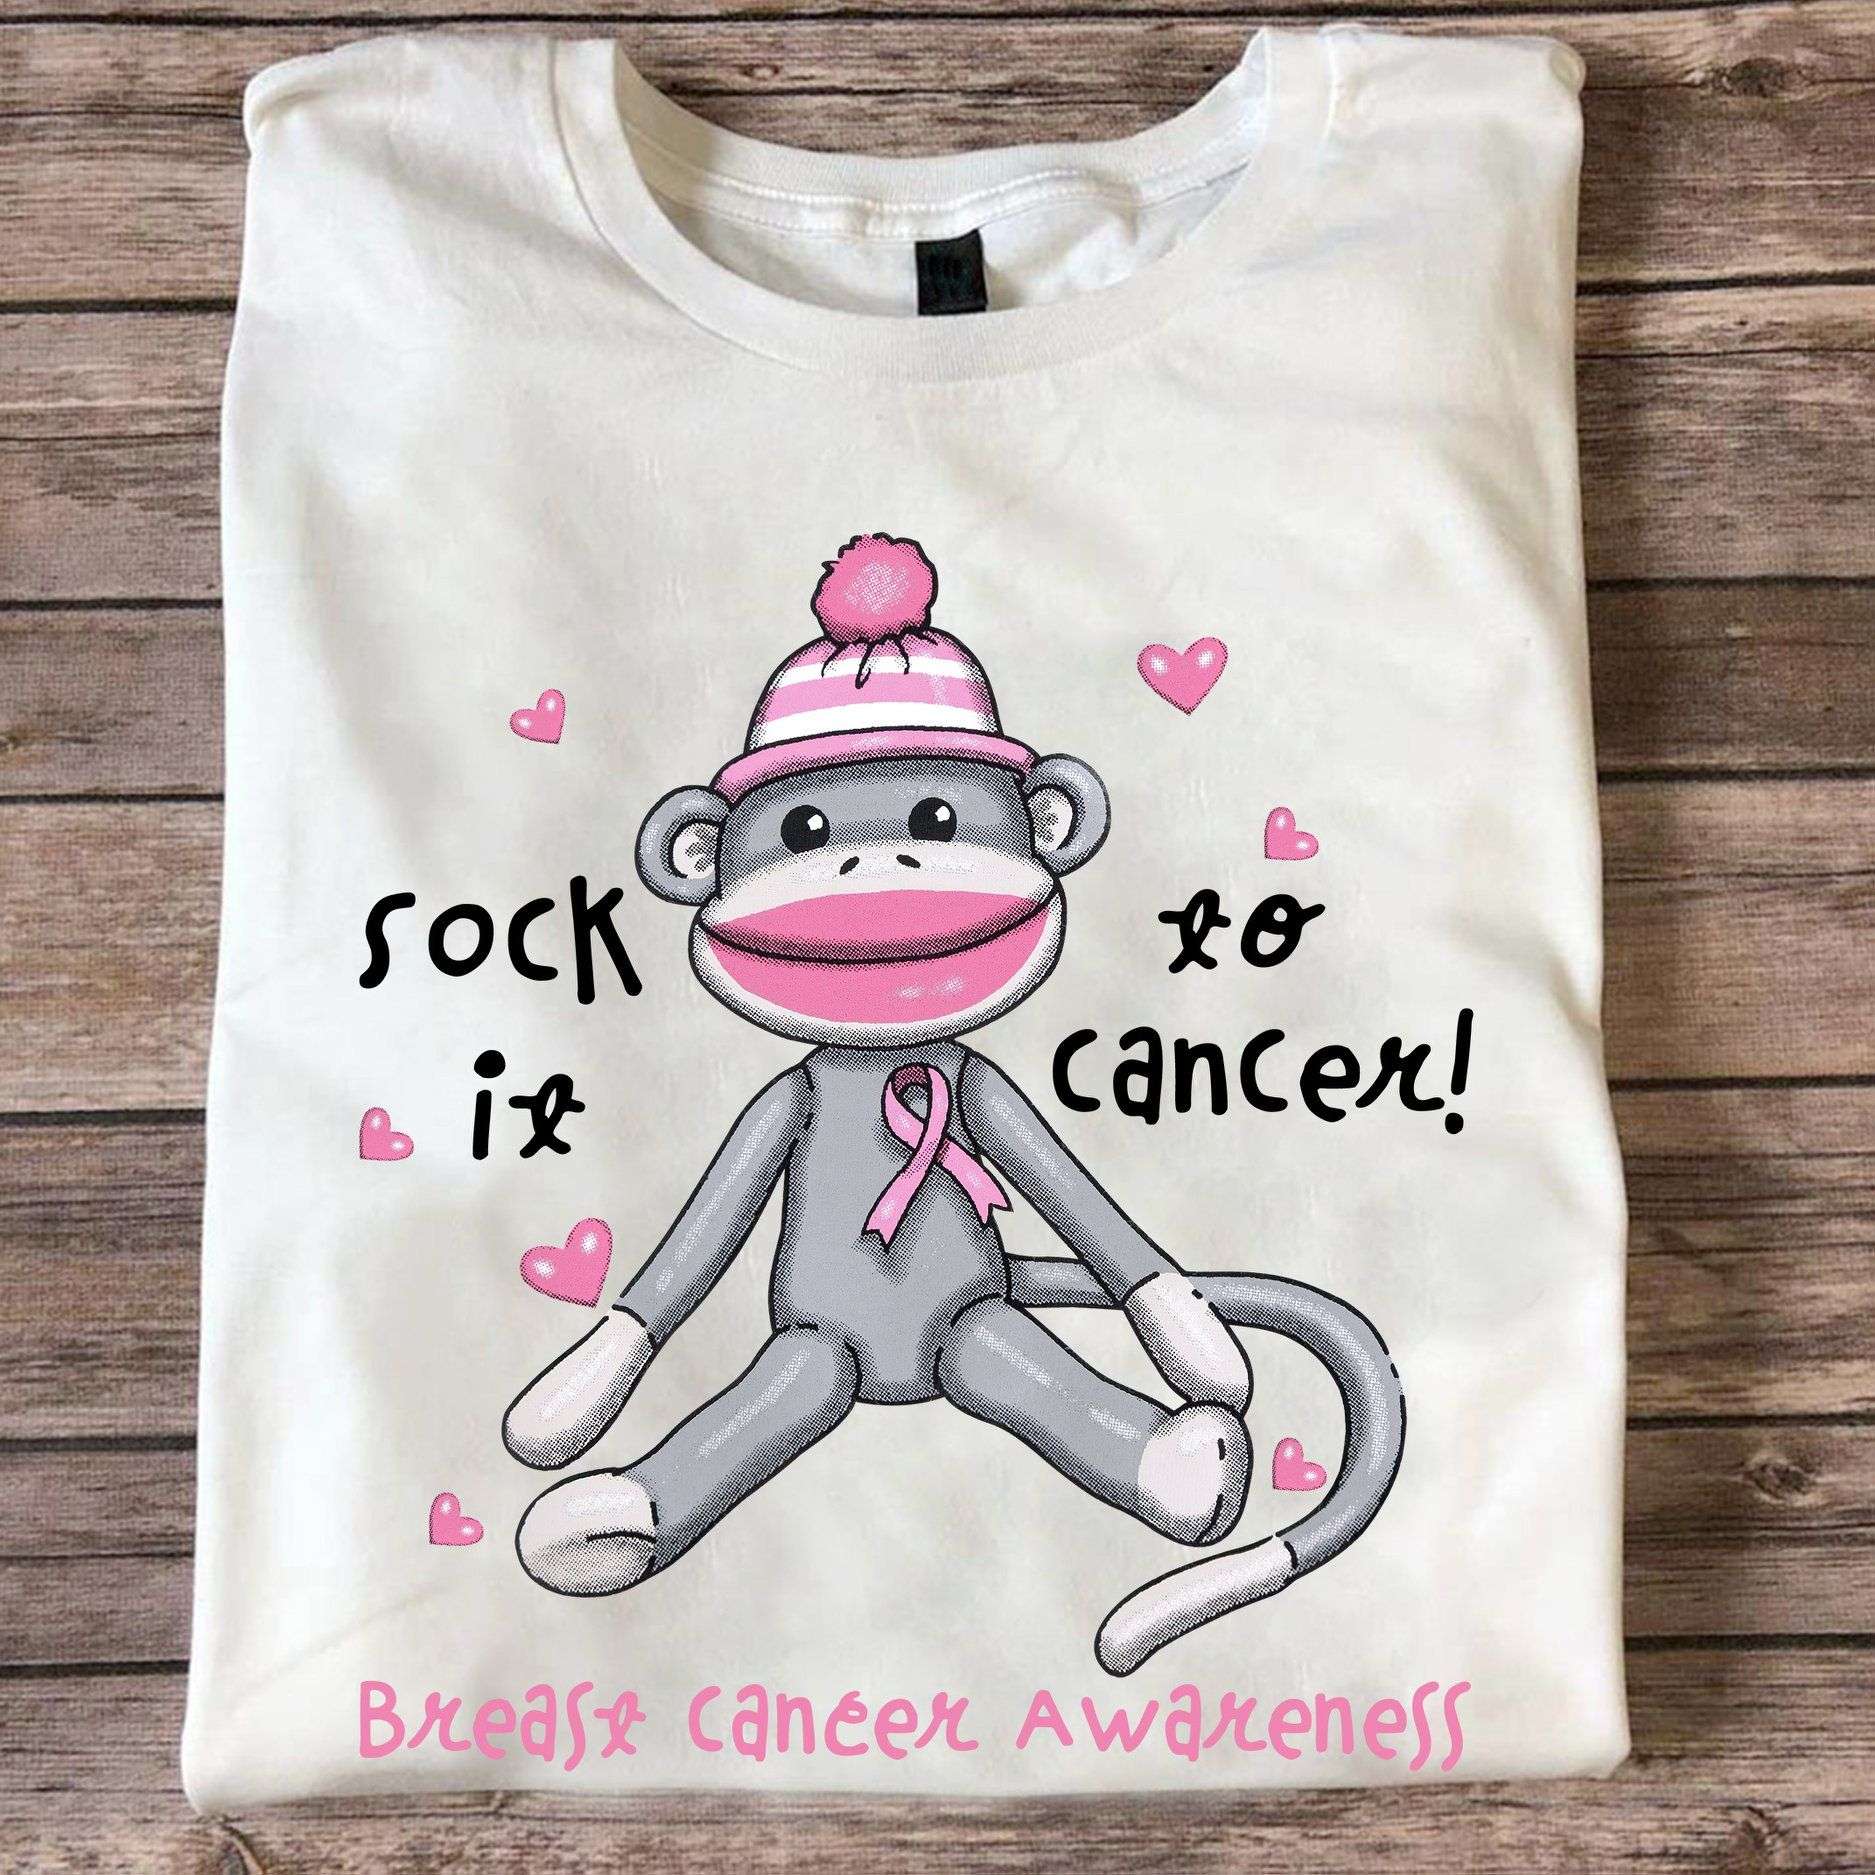 Sock it to cancer - Breast cancer awareness, monkey puppet cancer ribbon